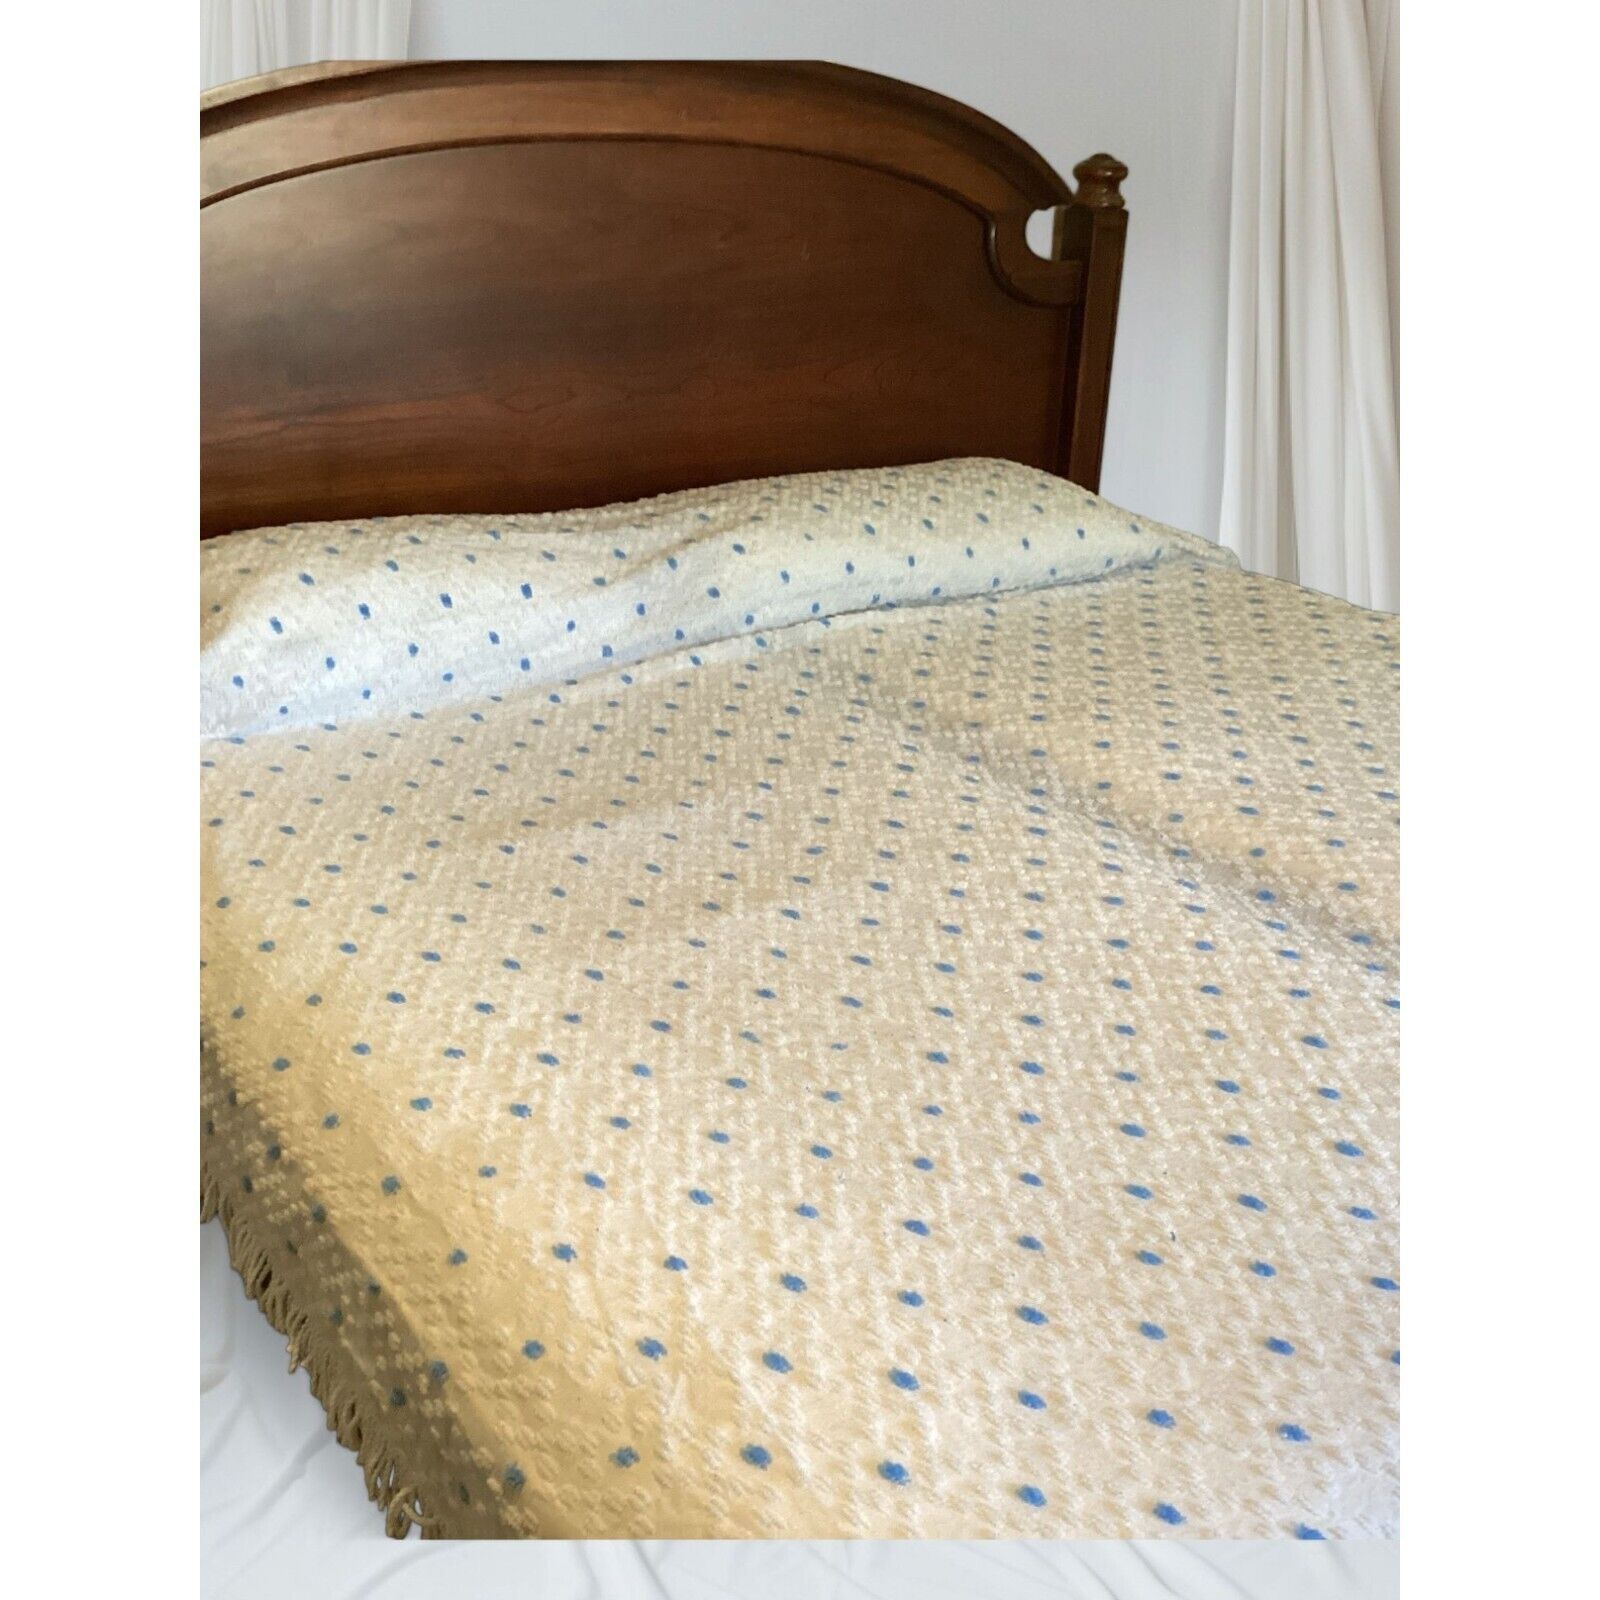 Vintage Full/Queen Bedspread Chenille White With Blue Dots